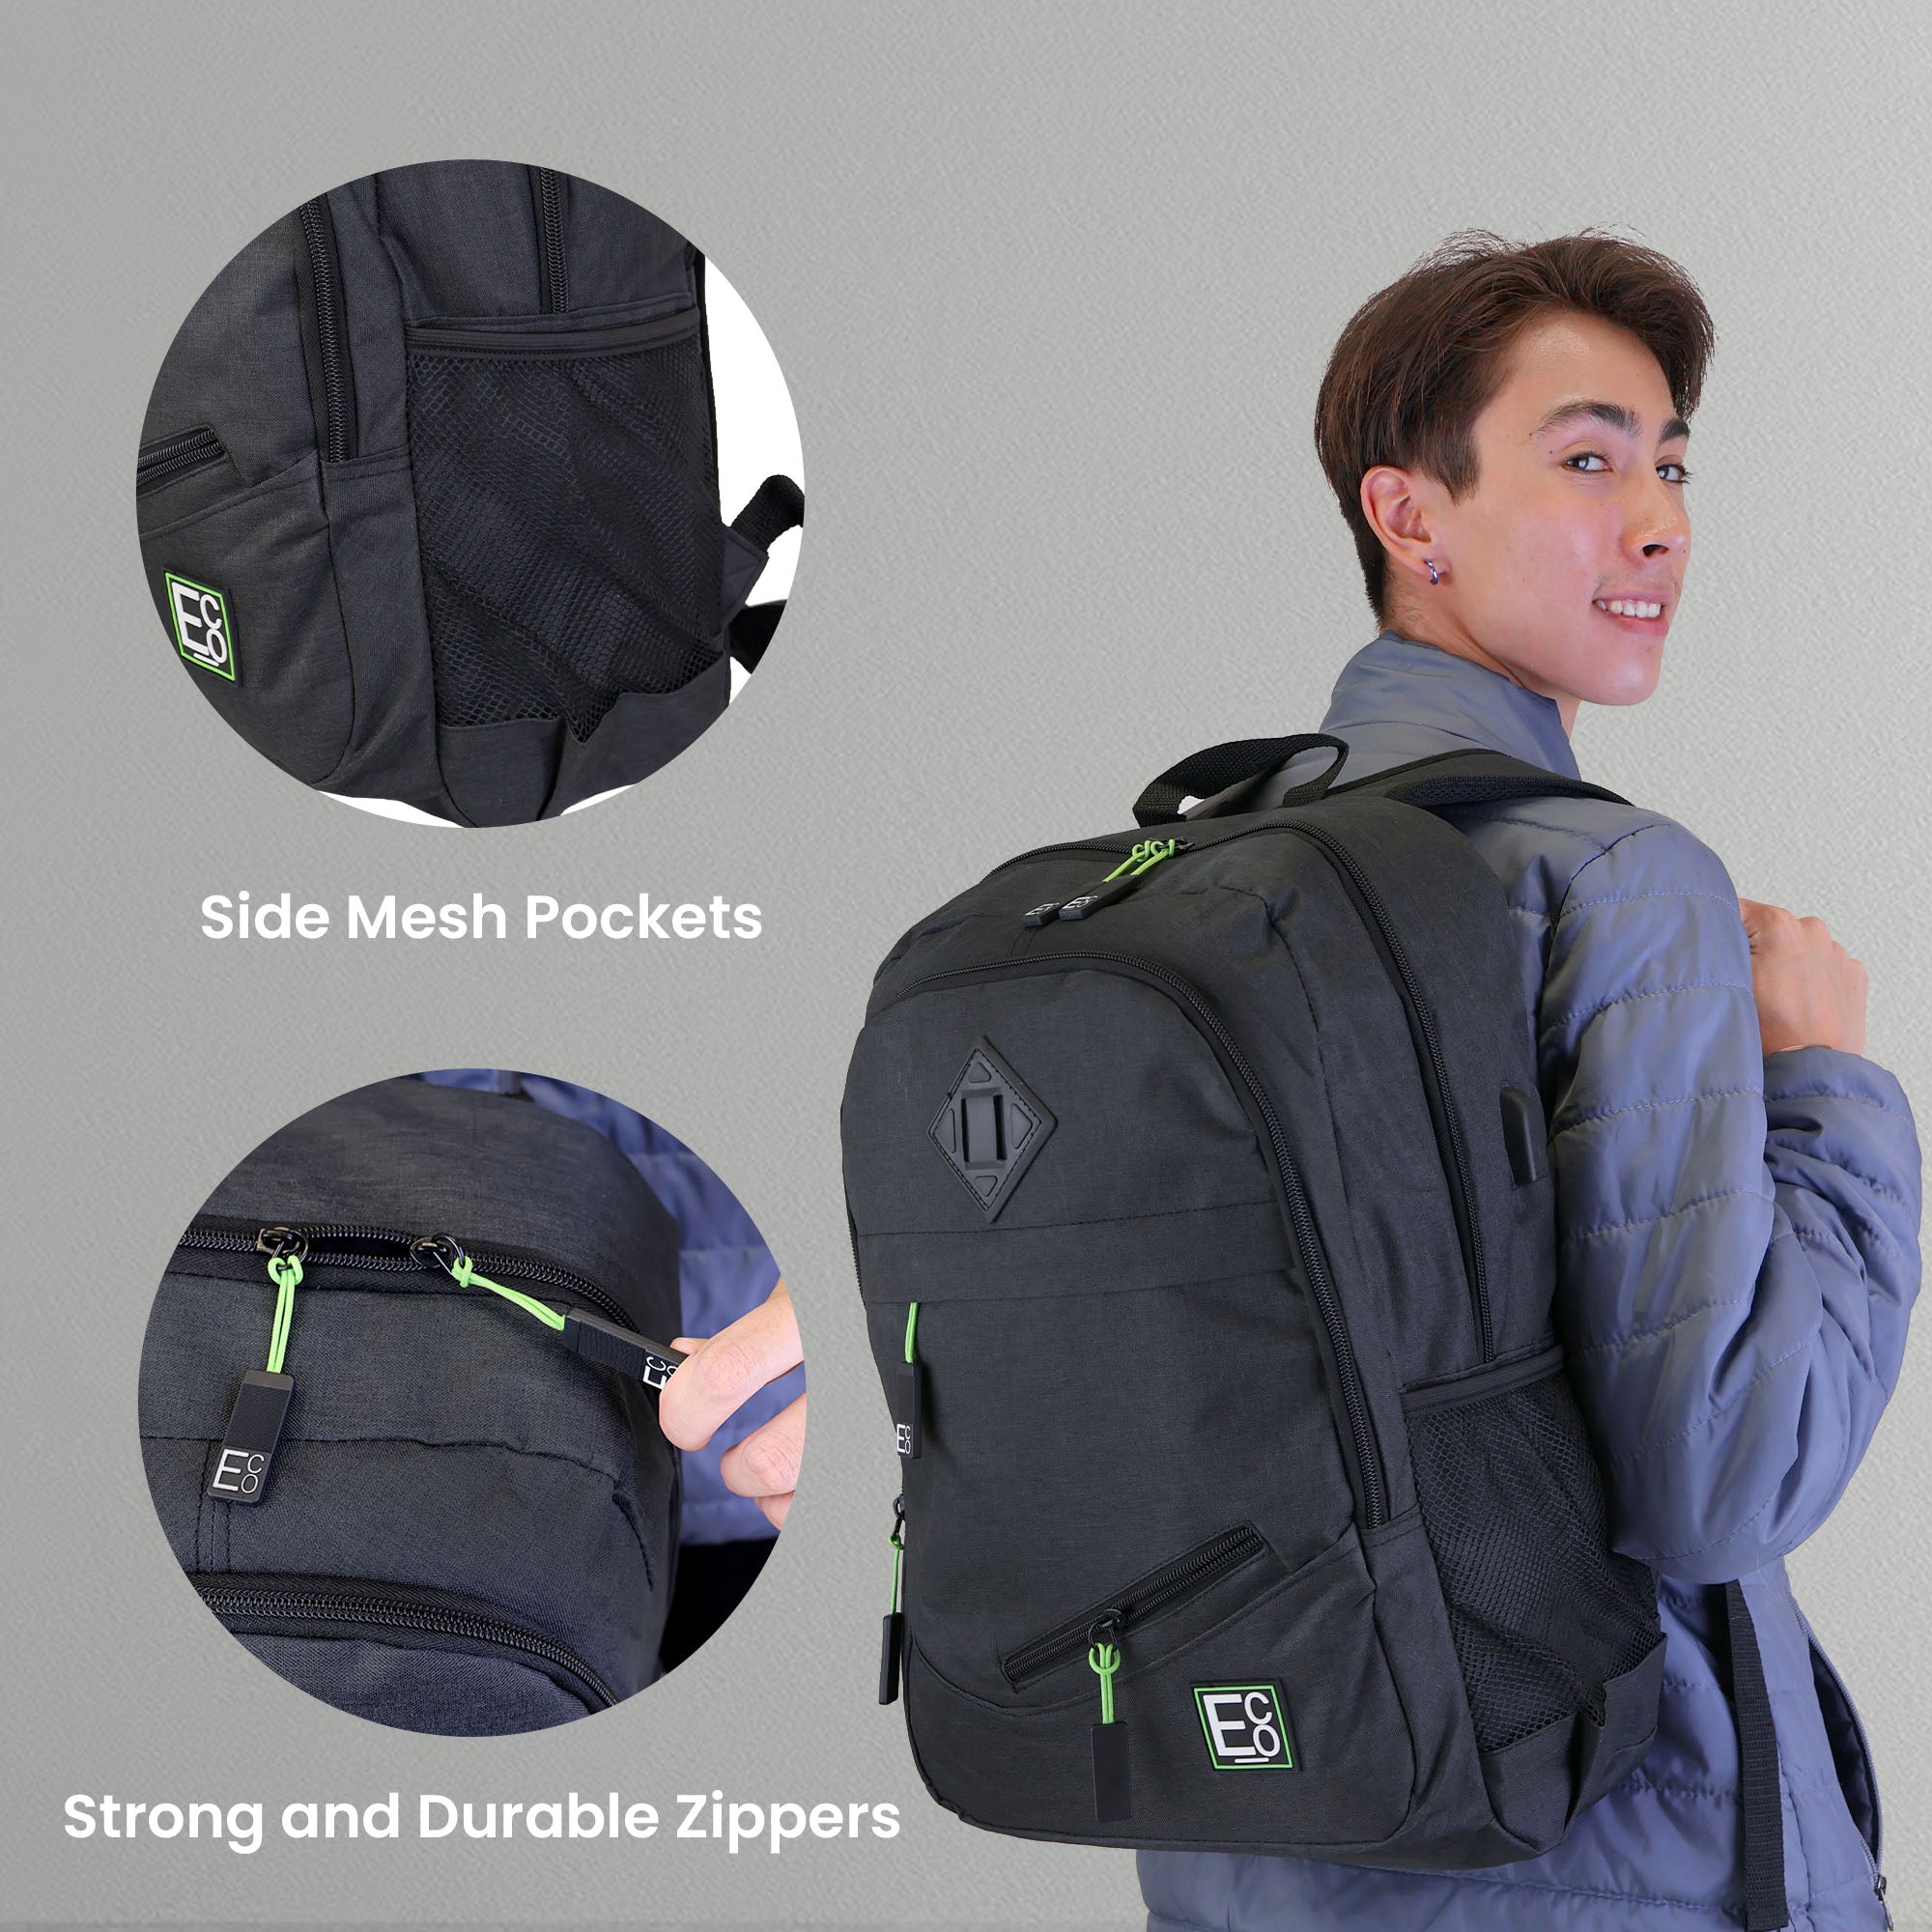 Backpack with USB Laptop and Phone Charging Port